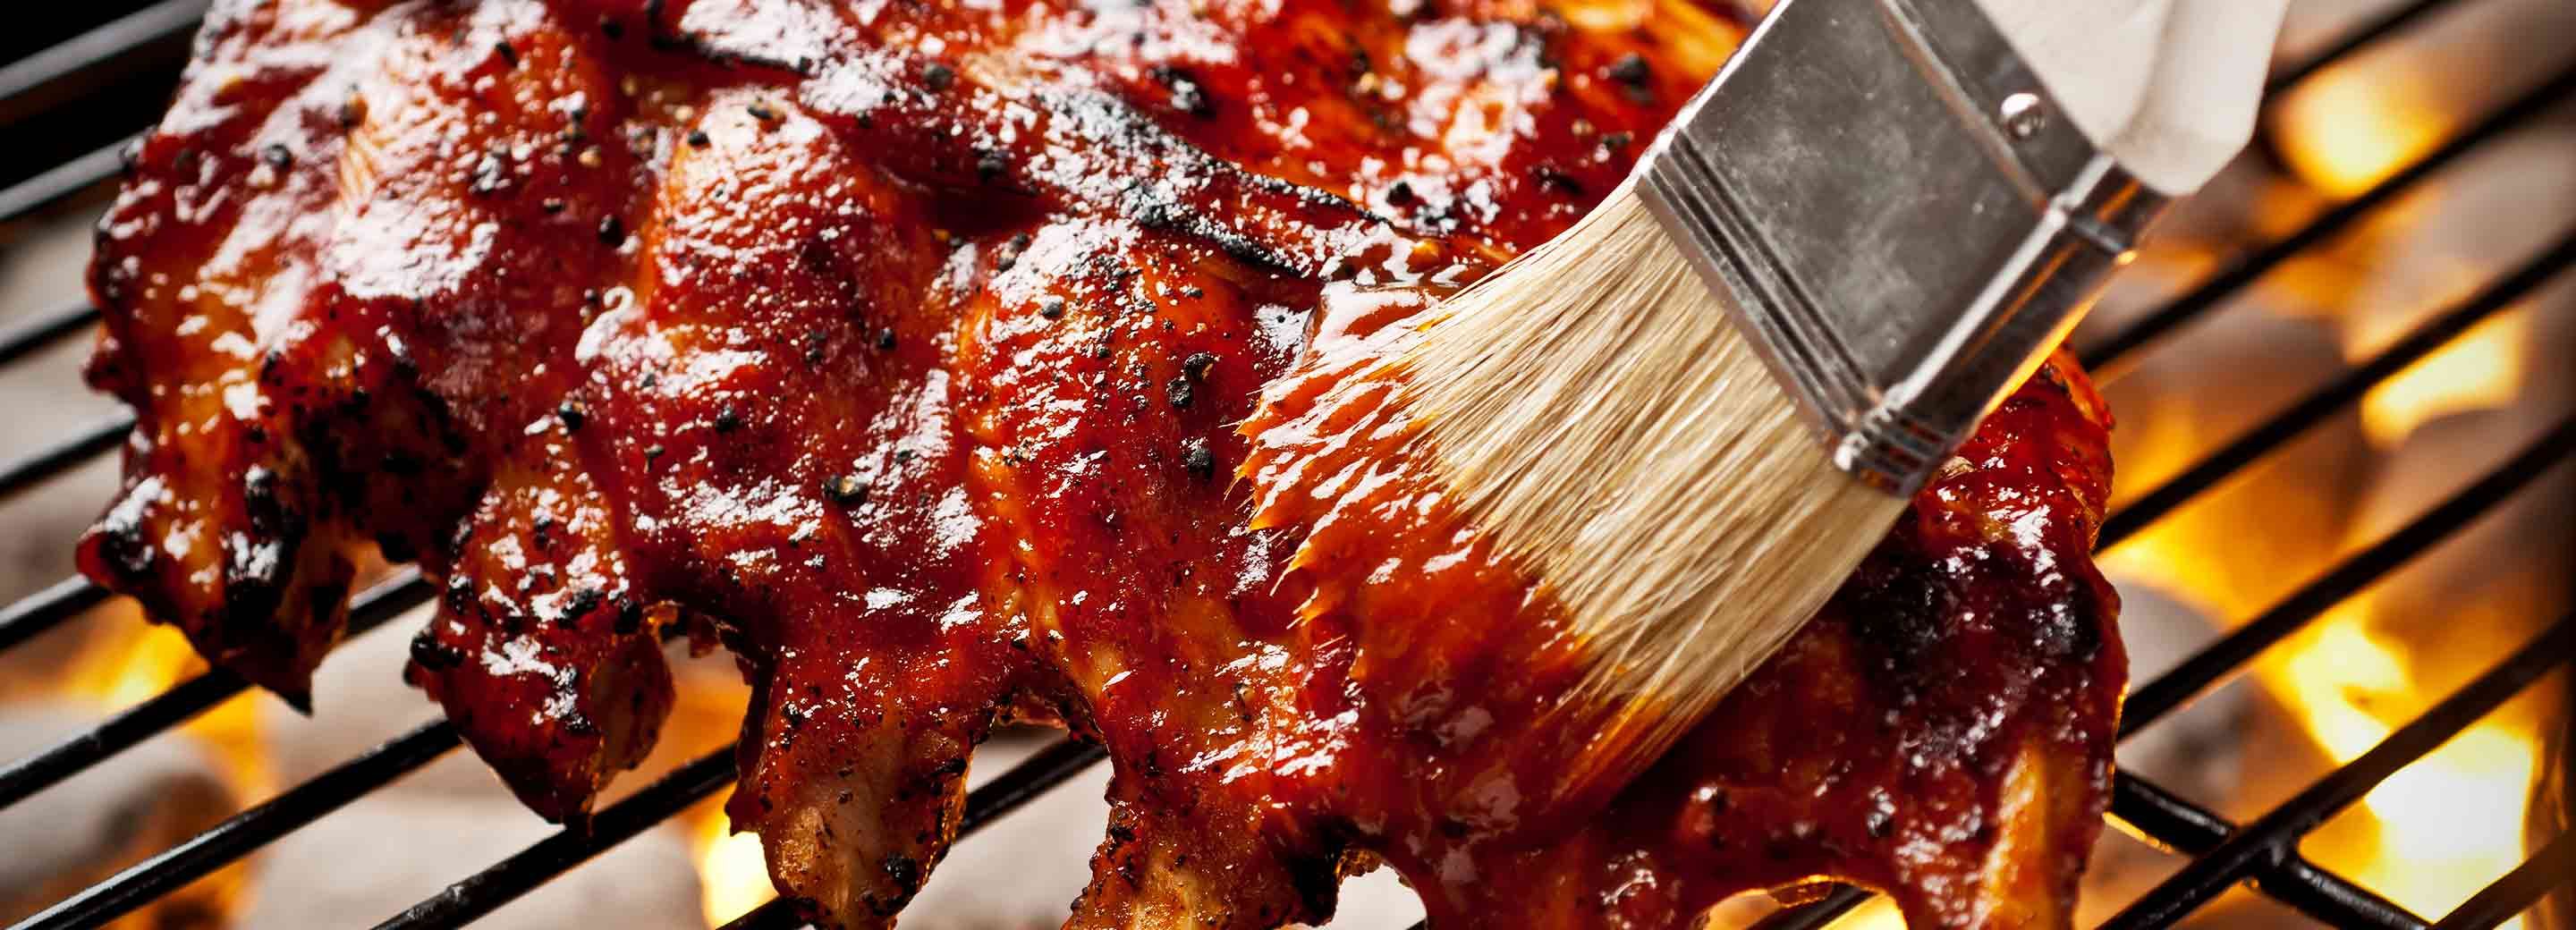 Southwest Baby Back Ribs with Chipotle BBQ Sauce